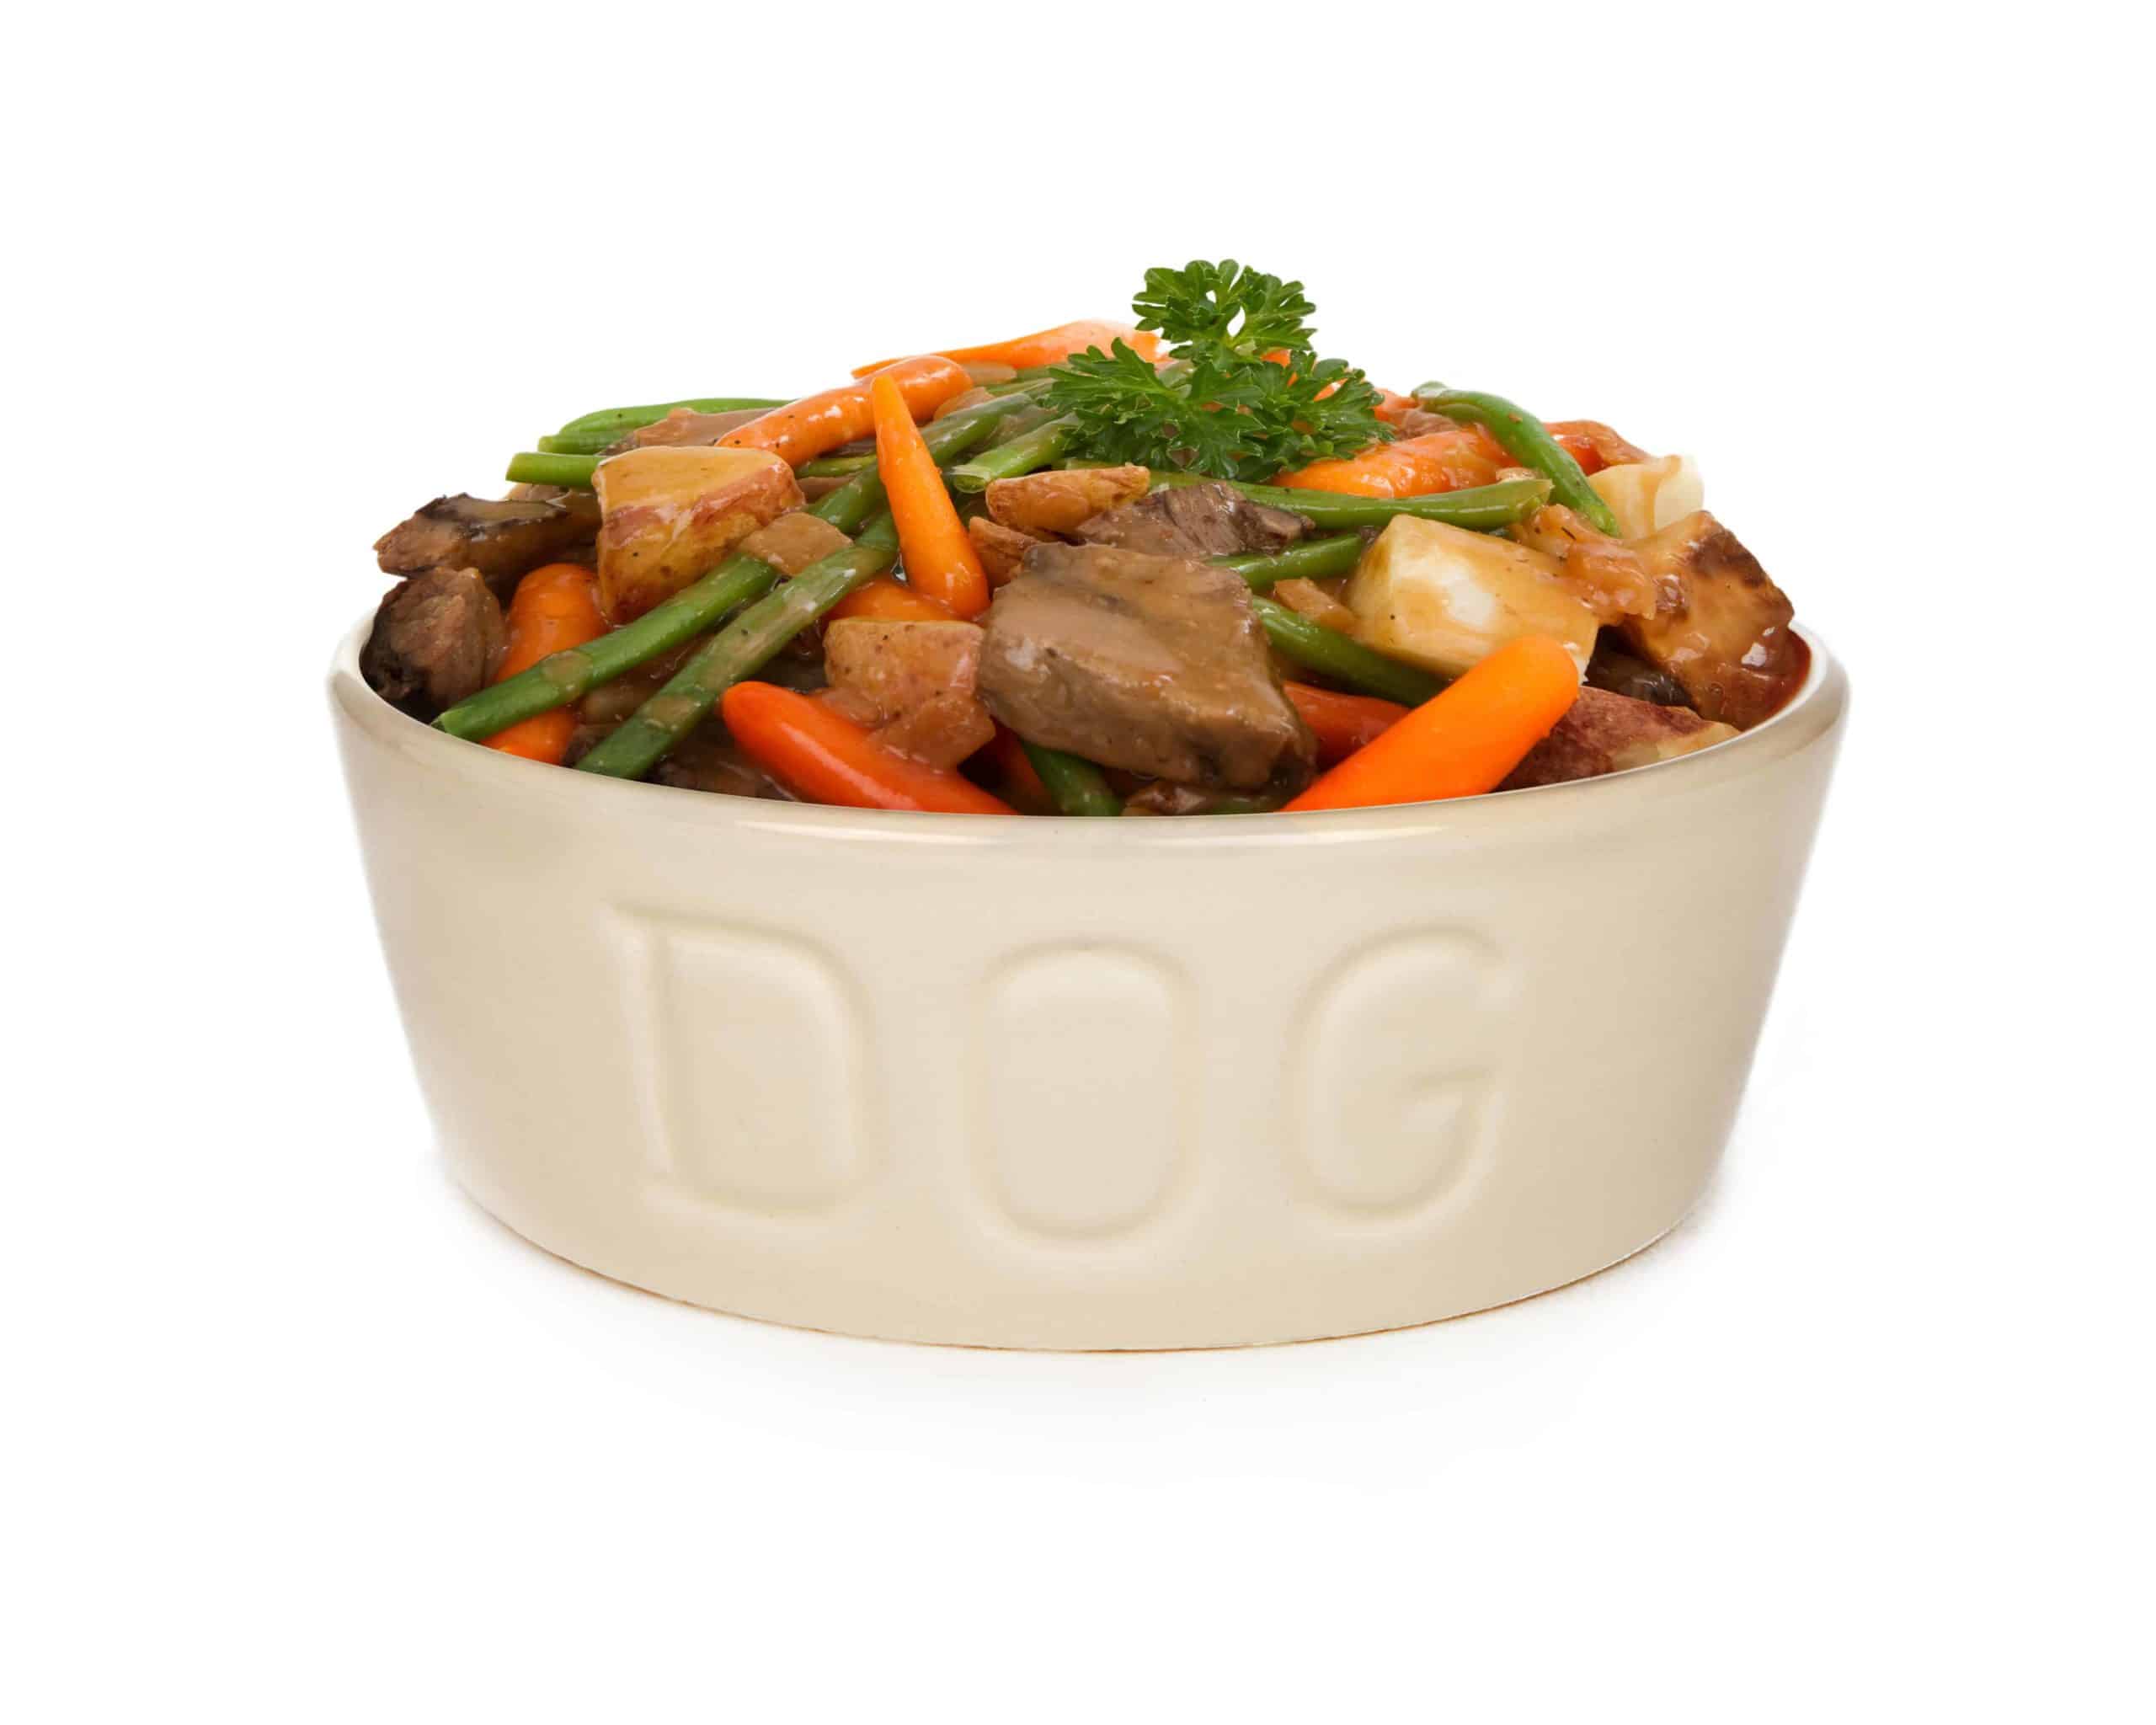 Beef in dog food bowl. Beef is an excellent source of protein for dogs.